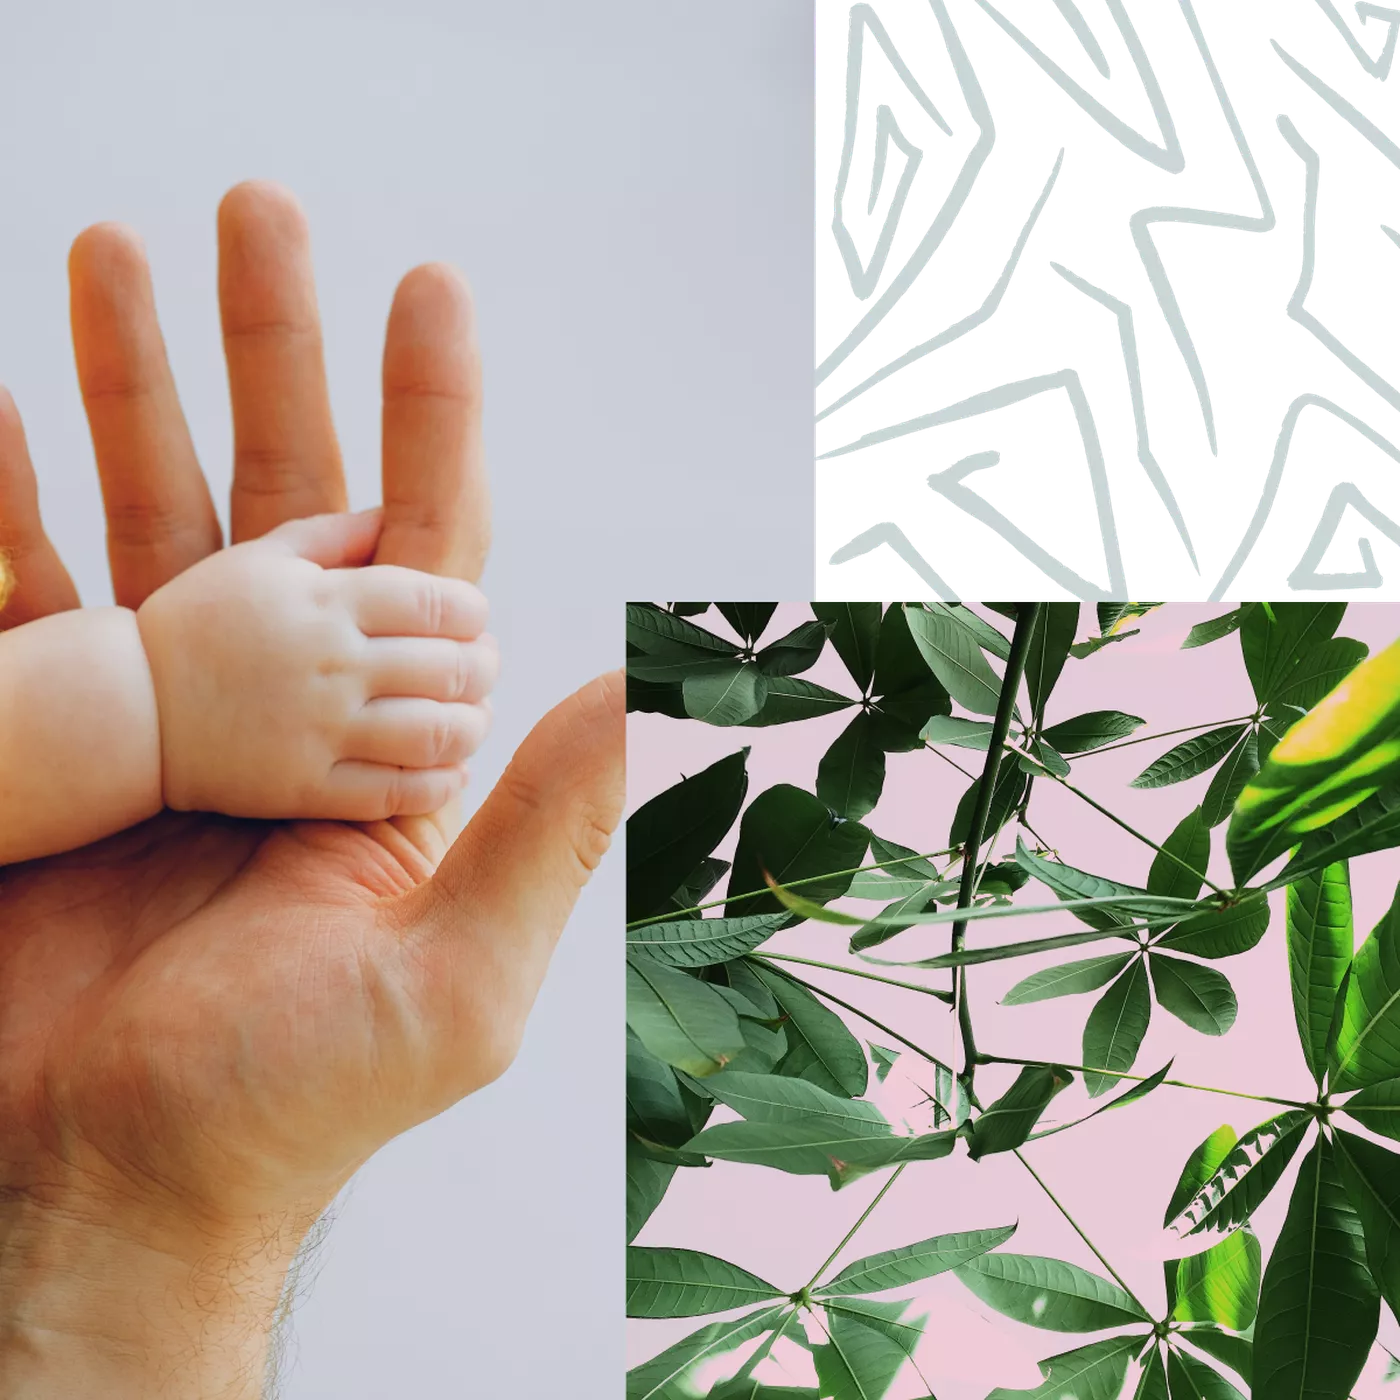 baby holding hand, plant